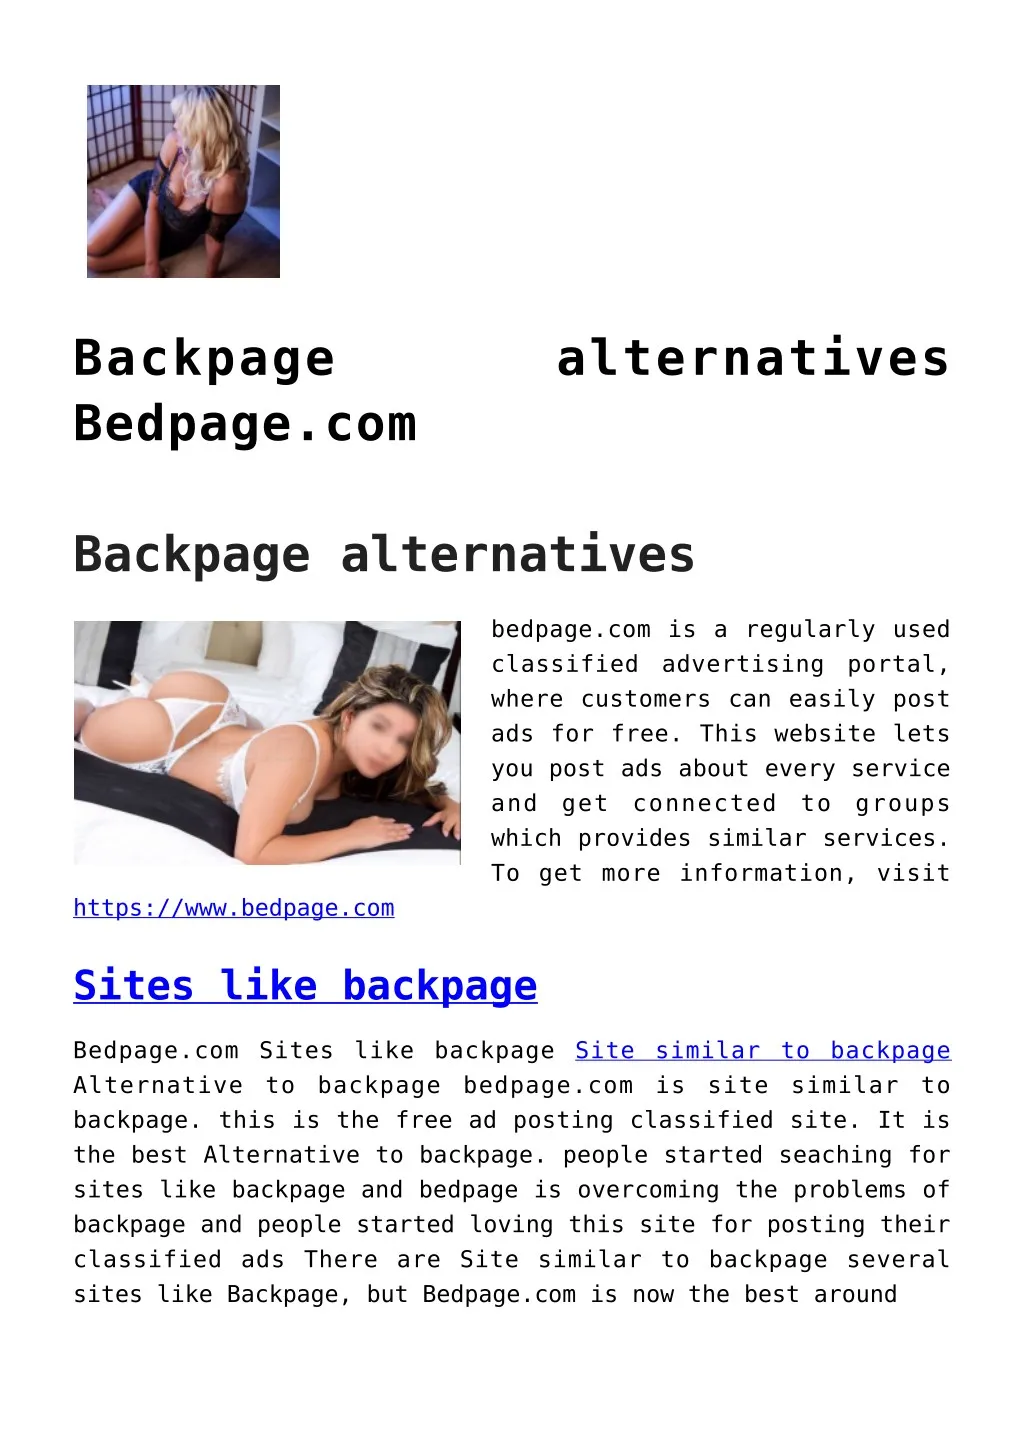 backpage bedpage com